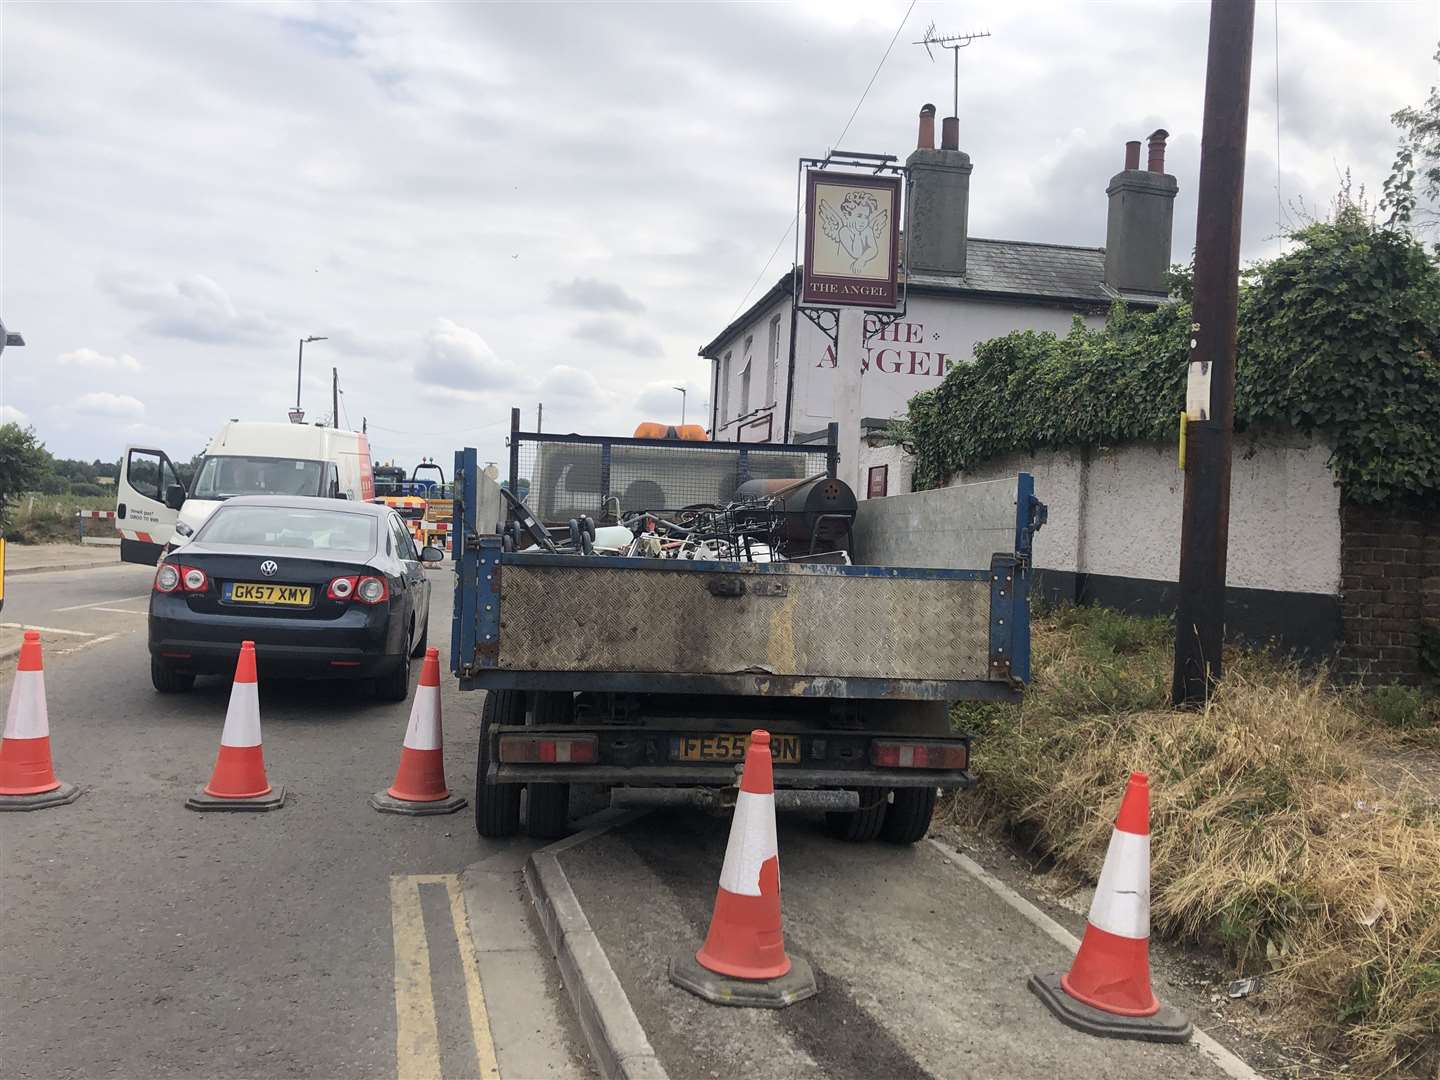 The road closure surrounds The Angel pub